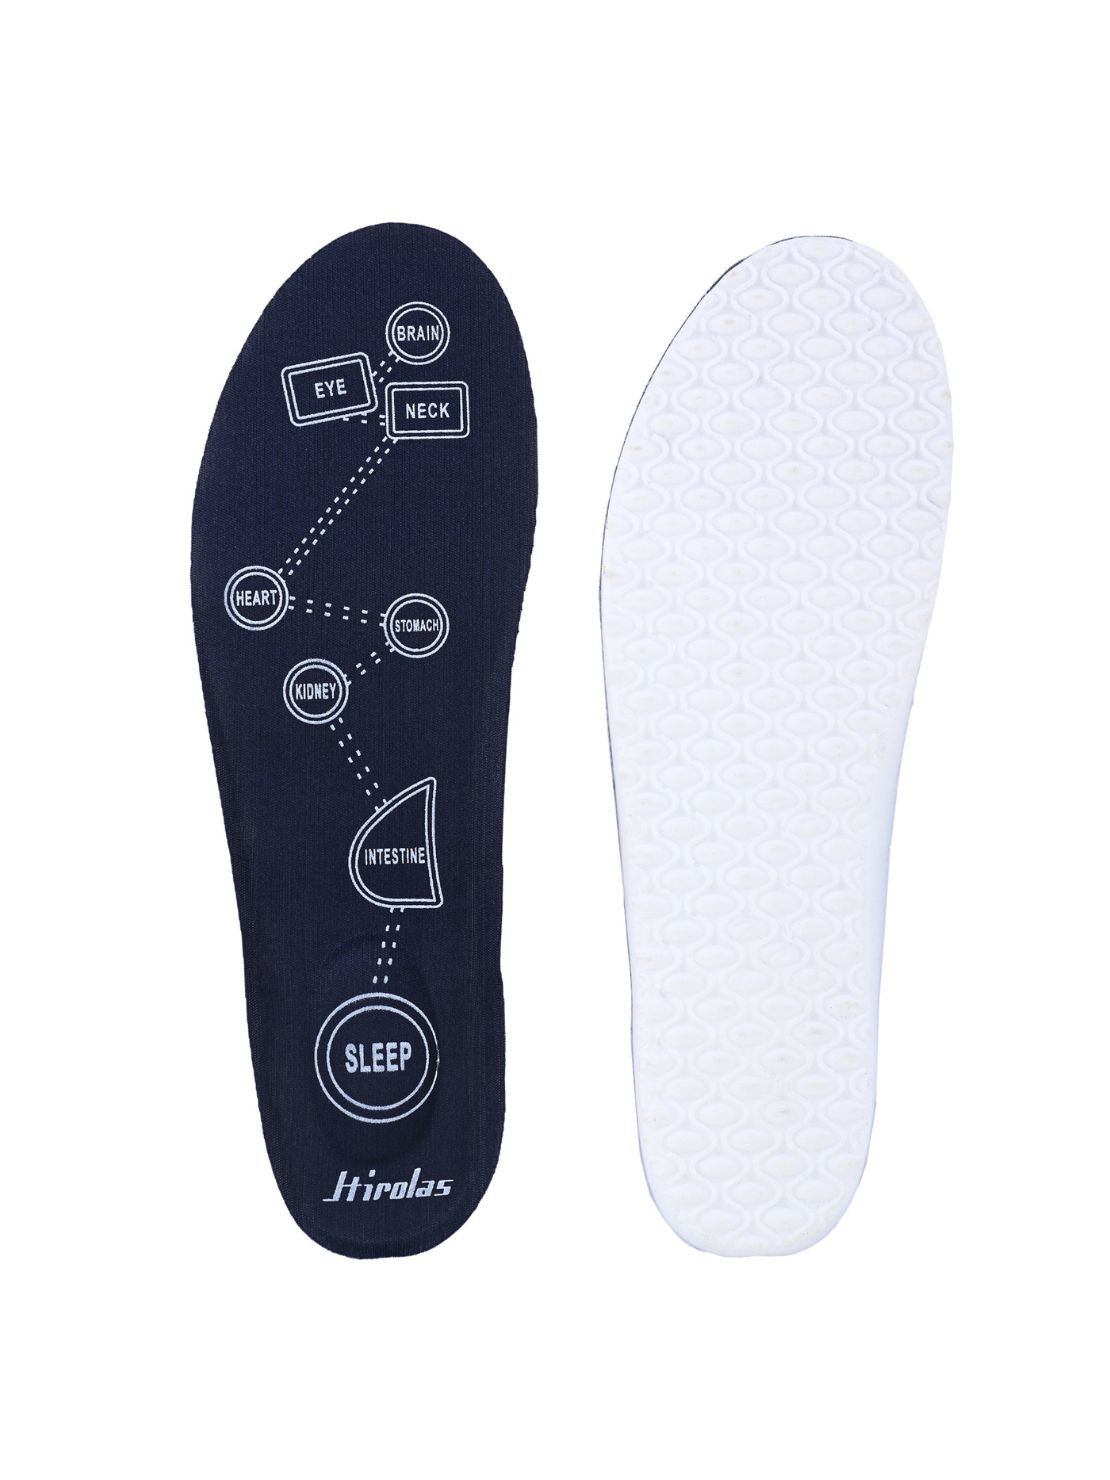 Hirolas Blue PU Insole foam Shoe Heels for all Shoes makes shoes Super Soft & Comfortable | PU Insoles|Cushioning for Feet Relief, Comfortable Insoles